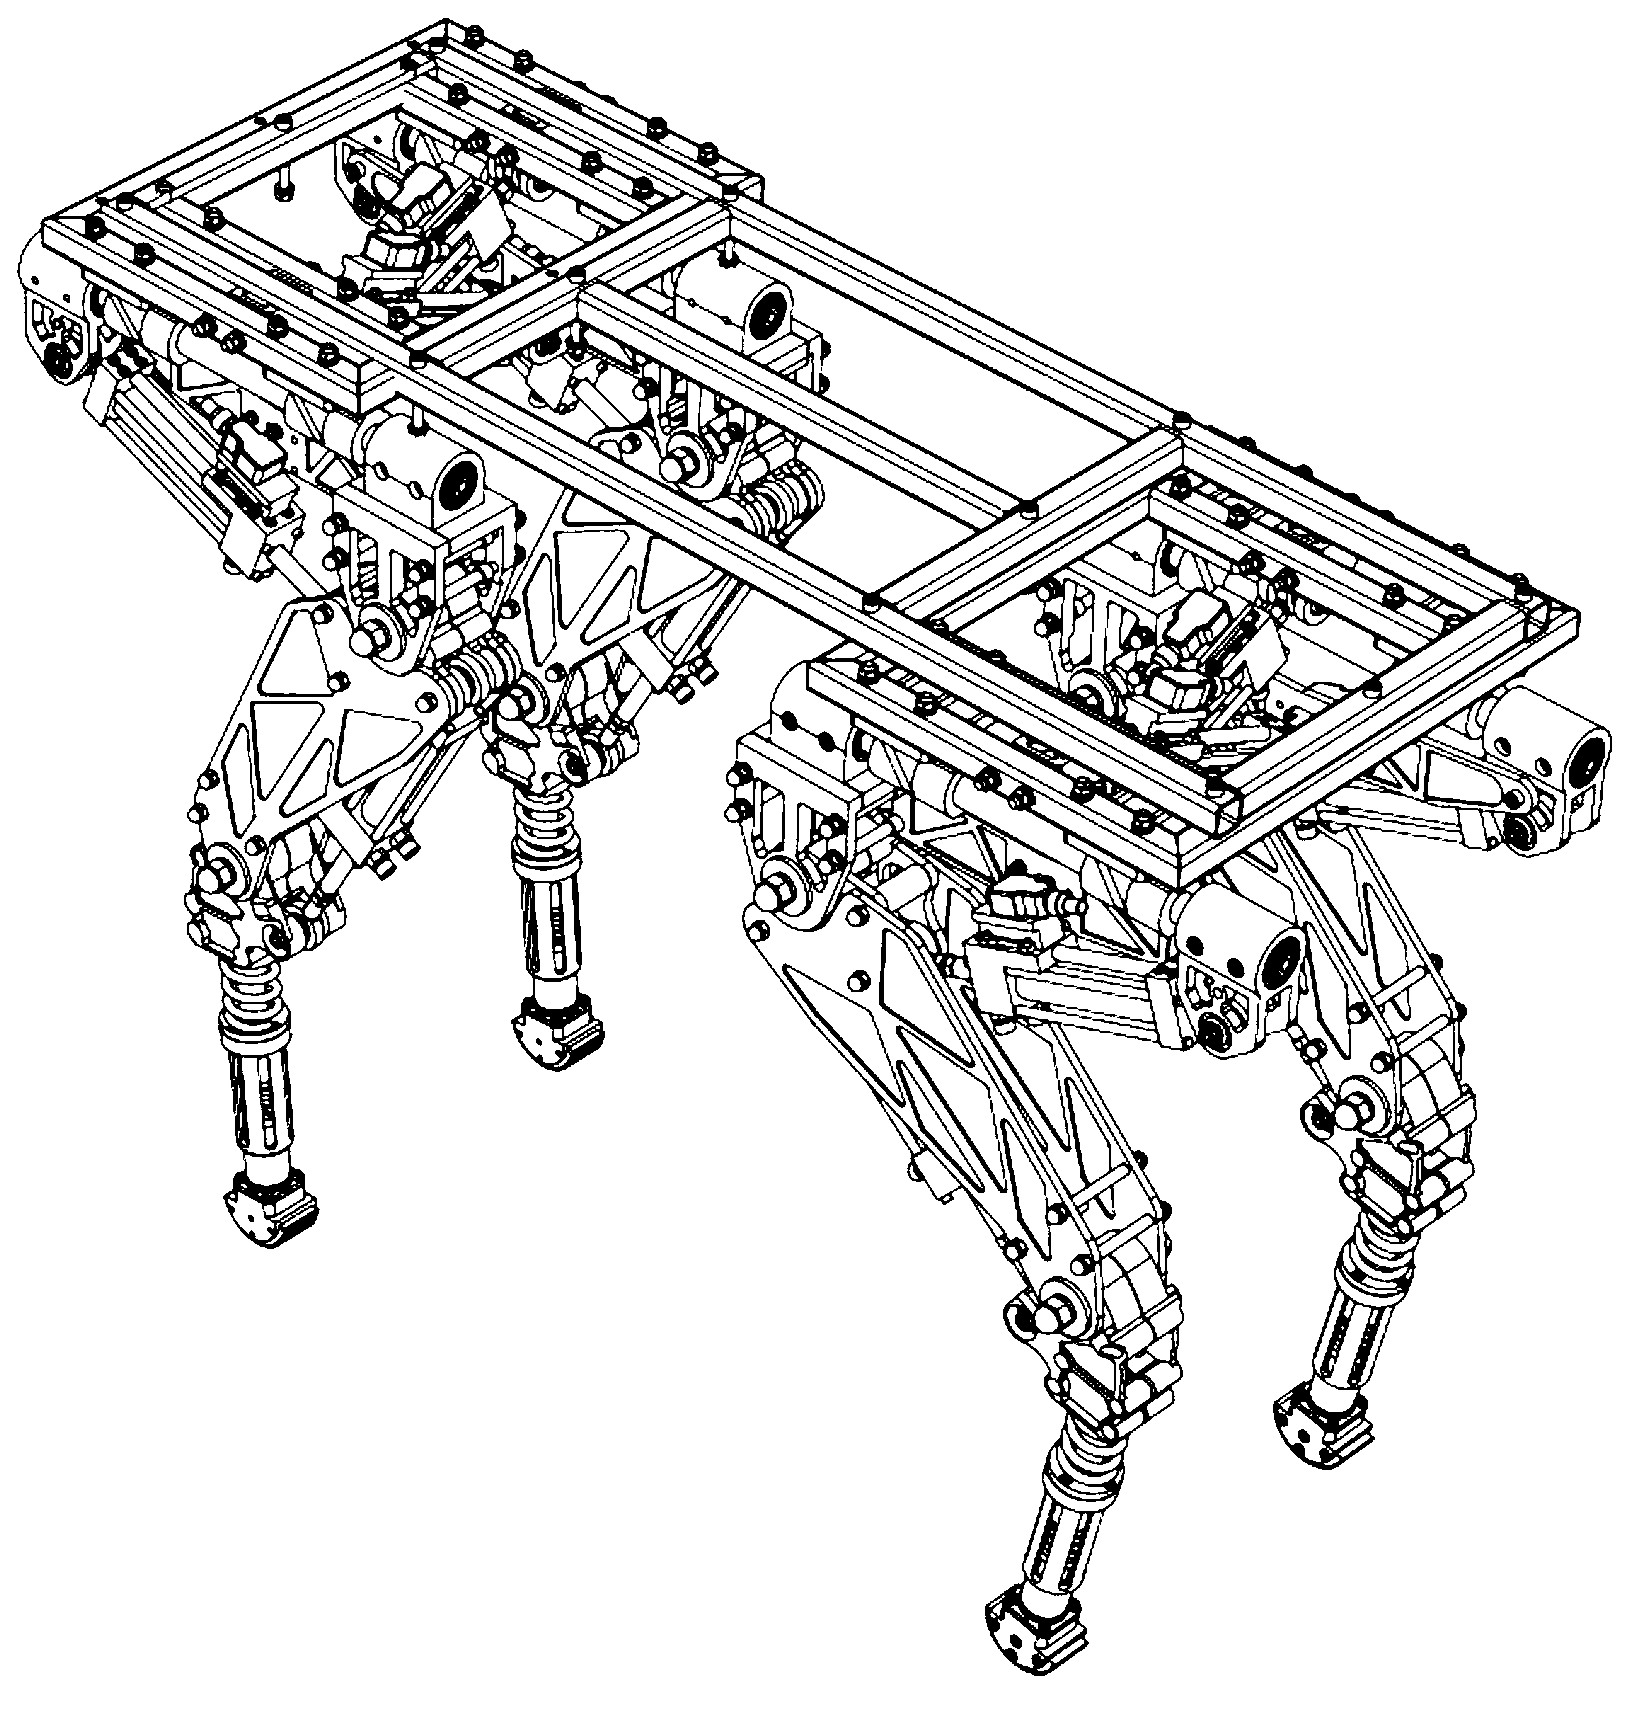 Modular hydraulic-drive four-leg robot with variable leg shape structures